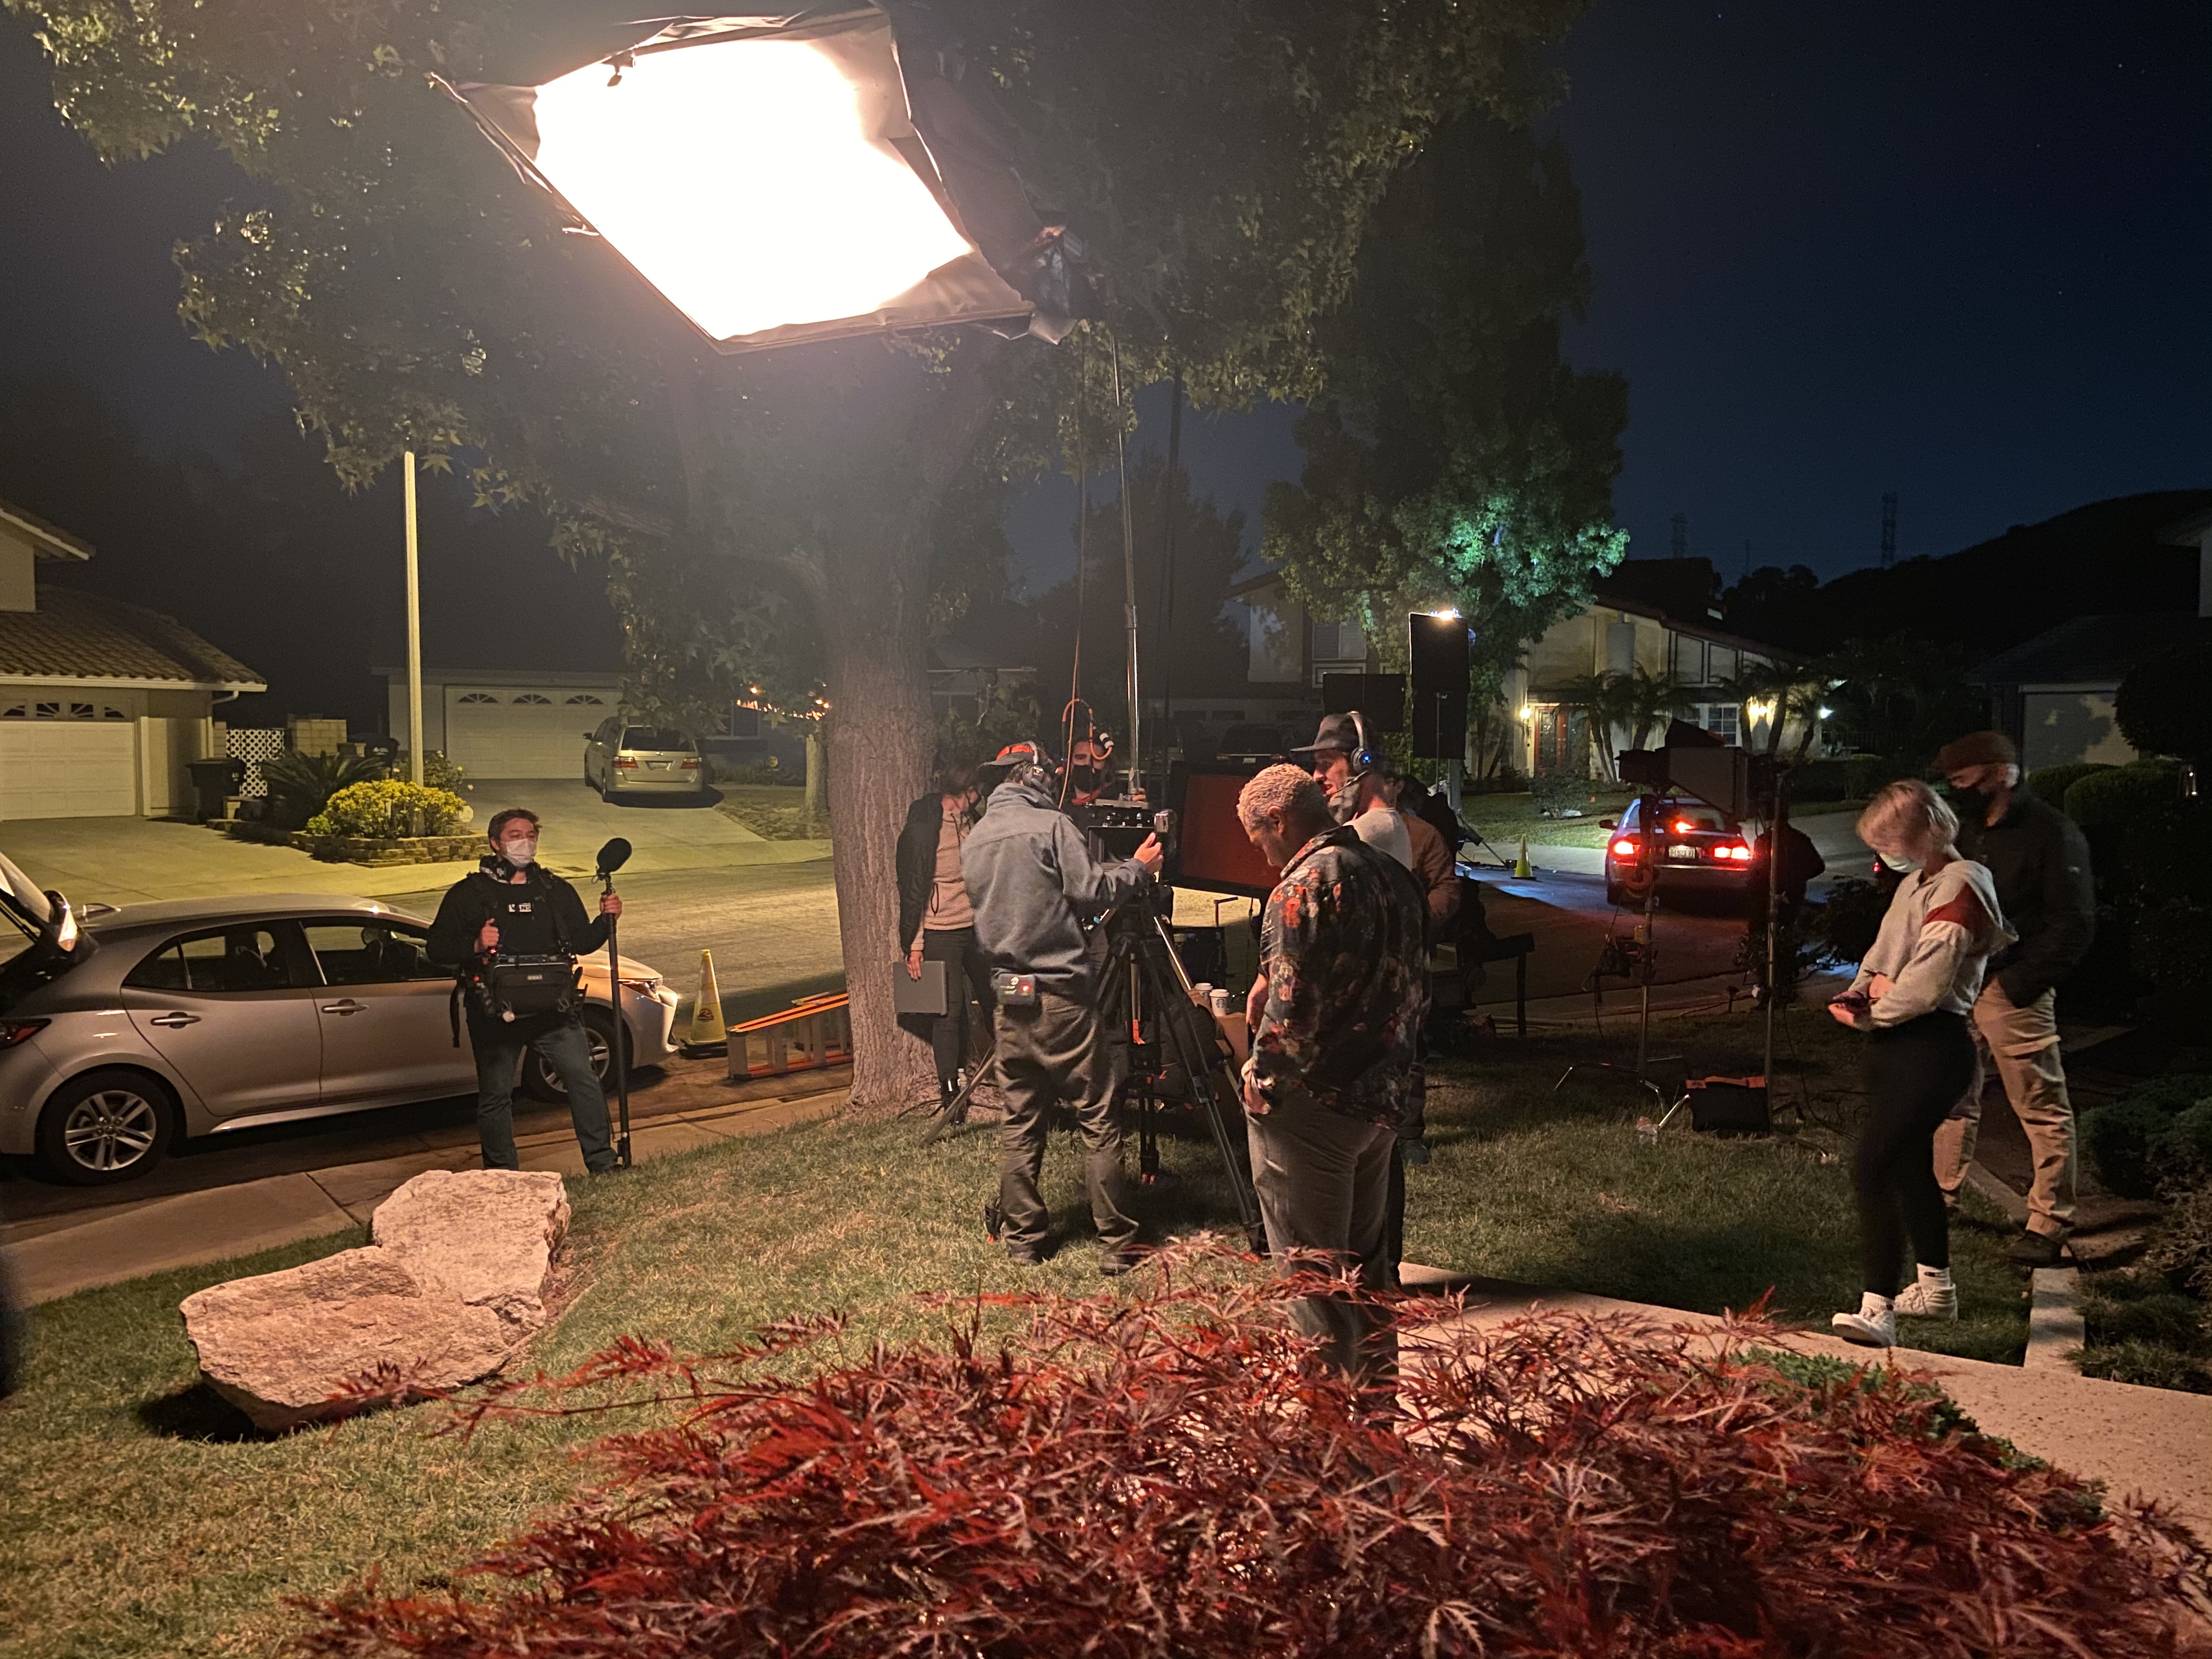 The Fallen Drive team prepares for a shot outside at night